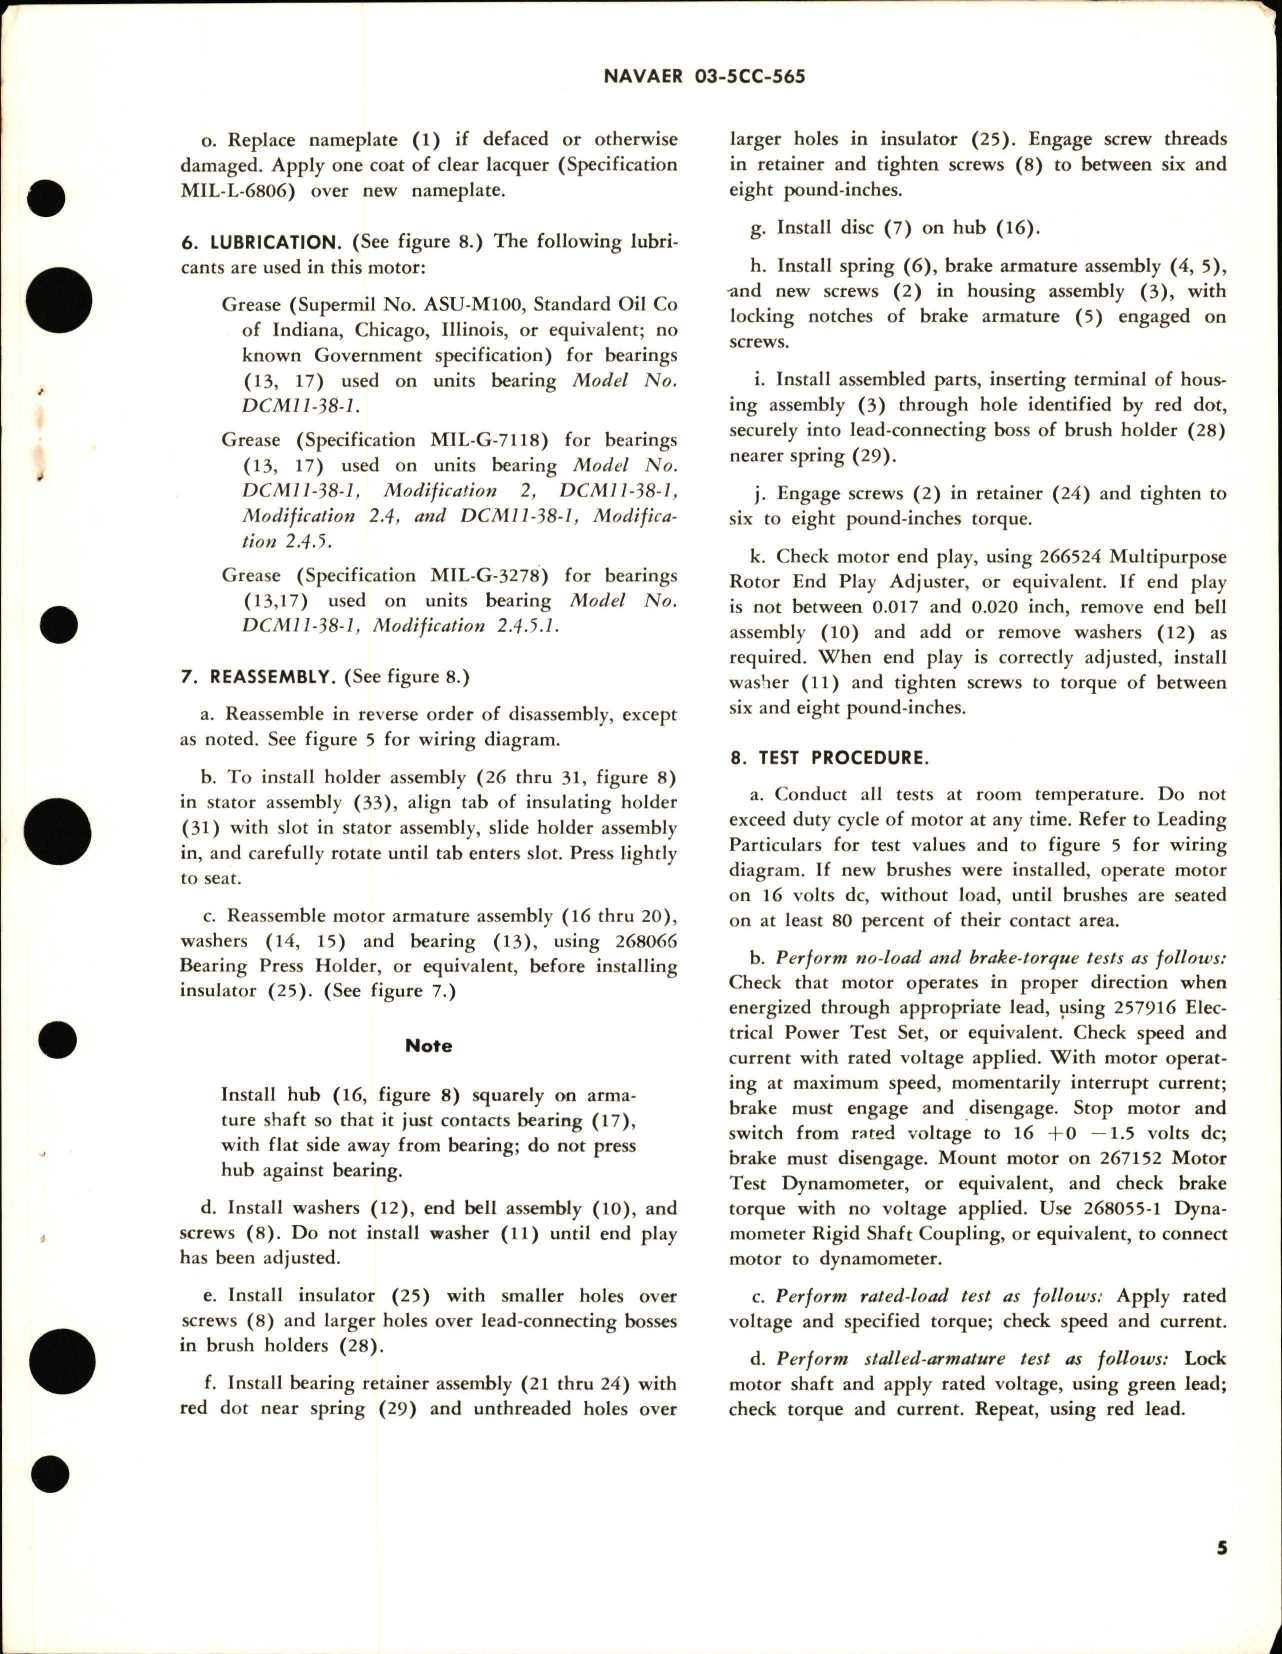 Sample page 5 from AirCorps Library document: Overhaul Instructions with Parts Breakdown for Motor, Aircraft Direct Current - Part 36886